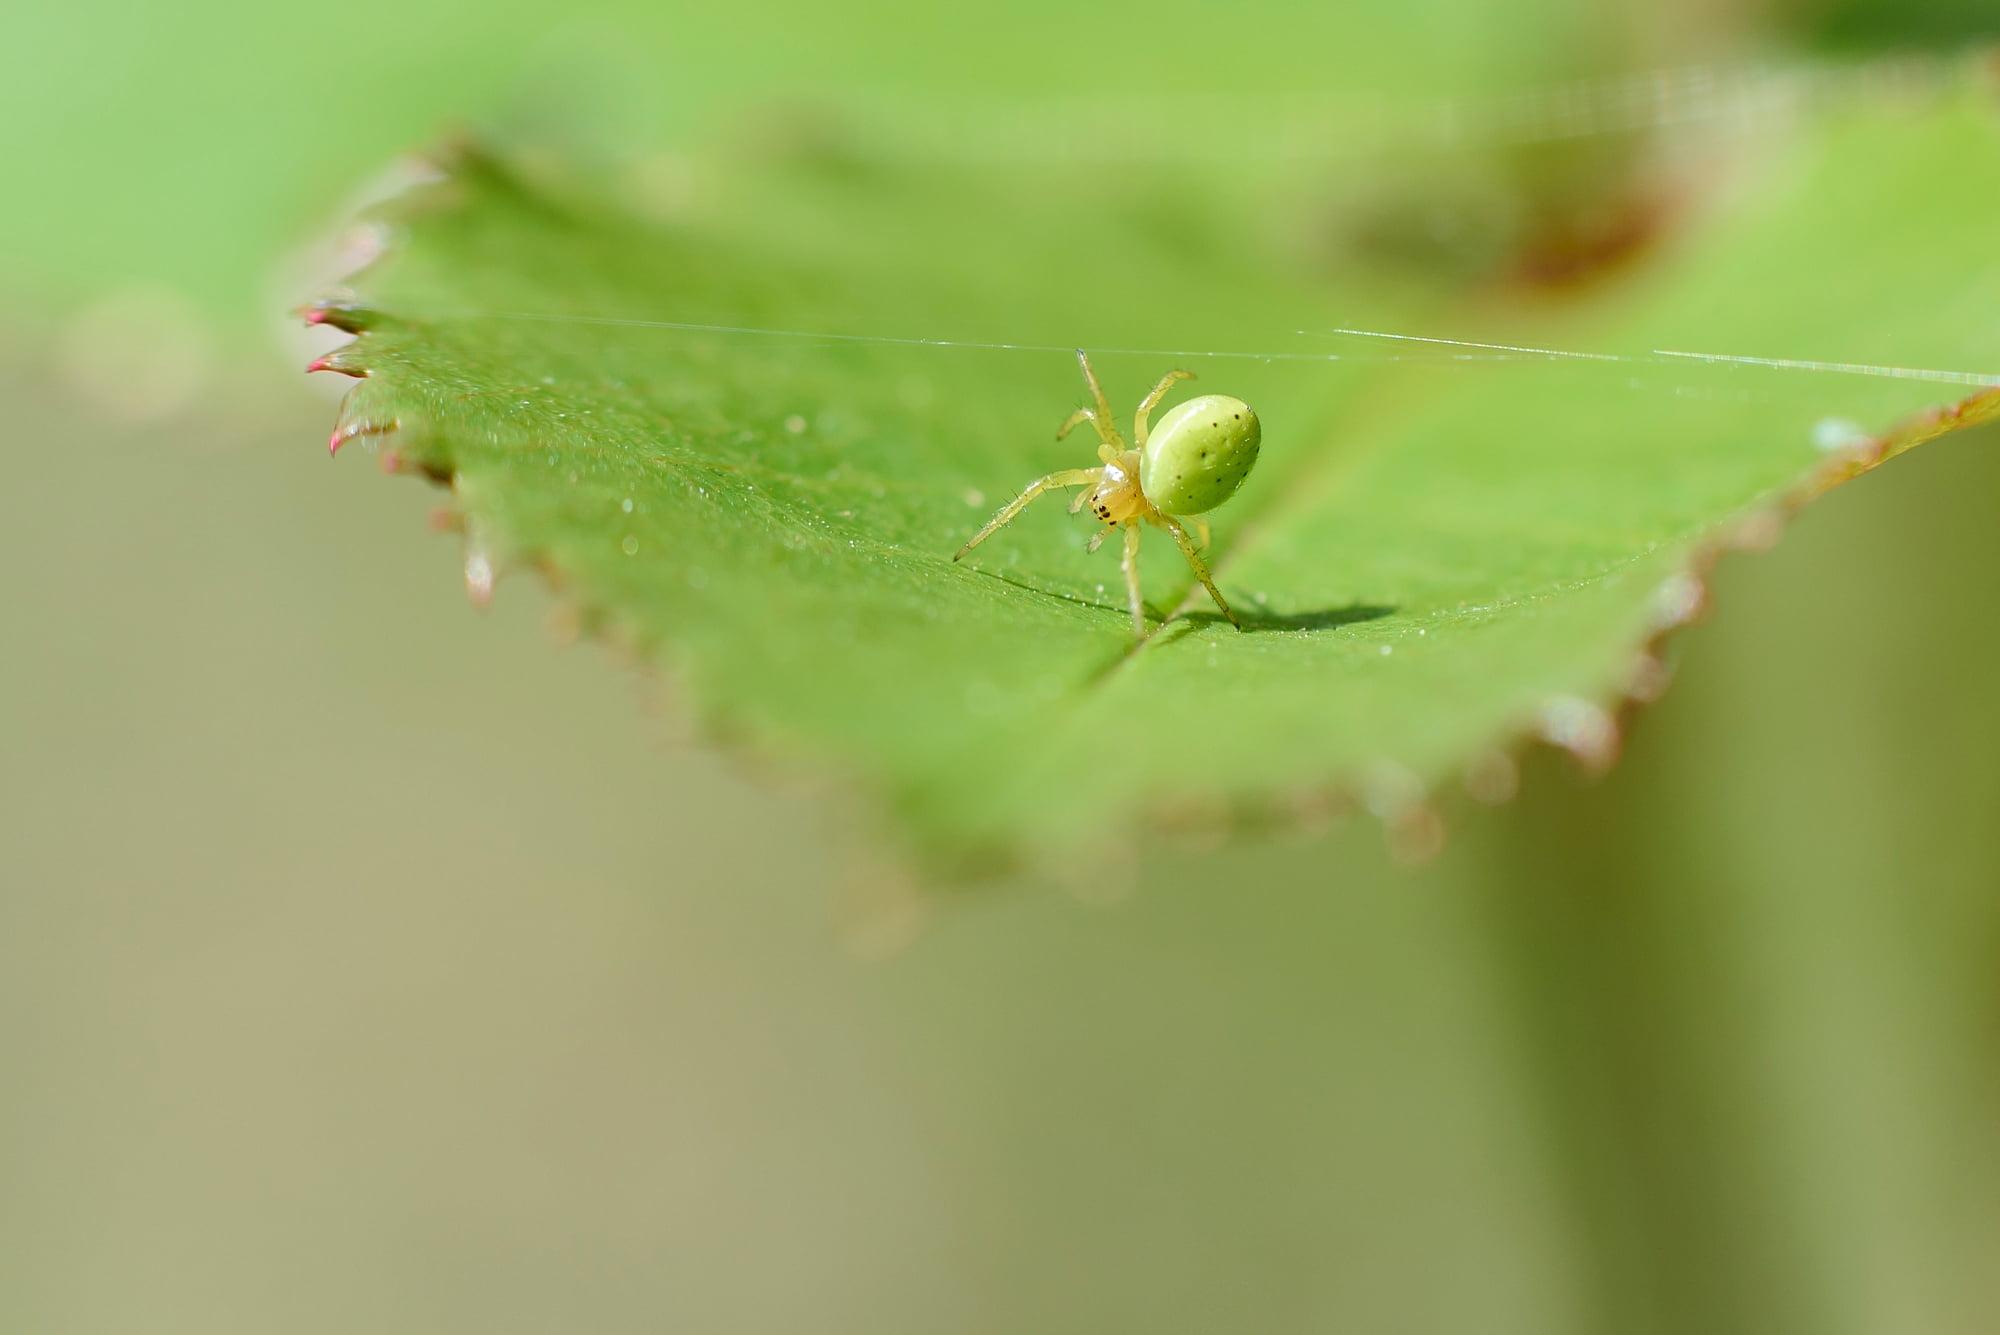 Green Crab Spider on plant leaf in selective focus